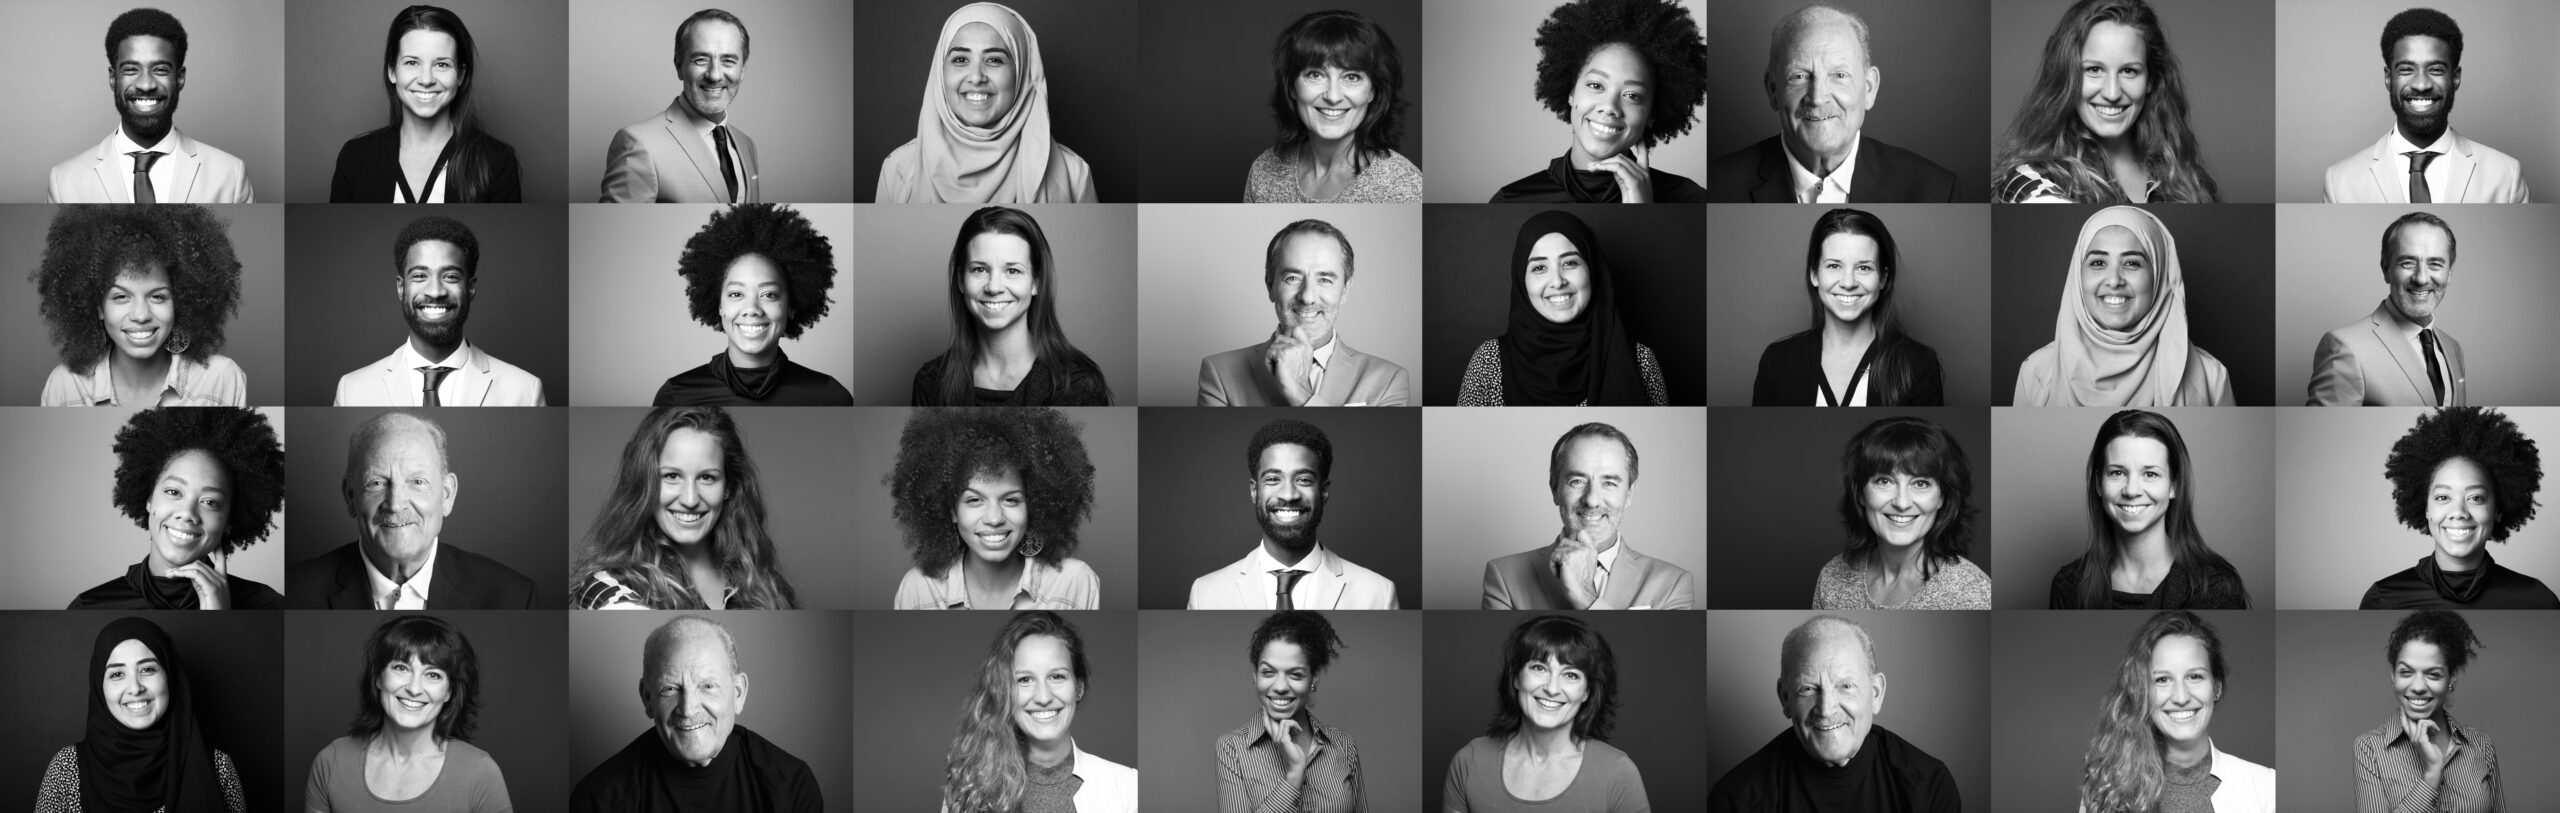 diverse group of people headshot photos arranged on black or grey background indicating diversity and inclusion.